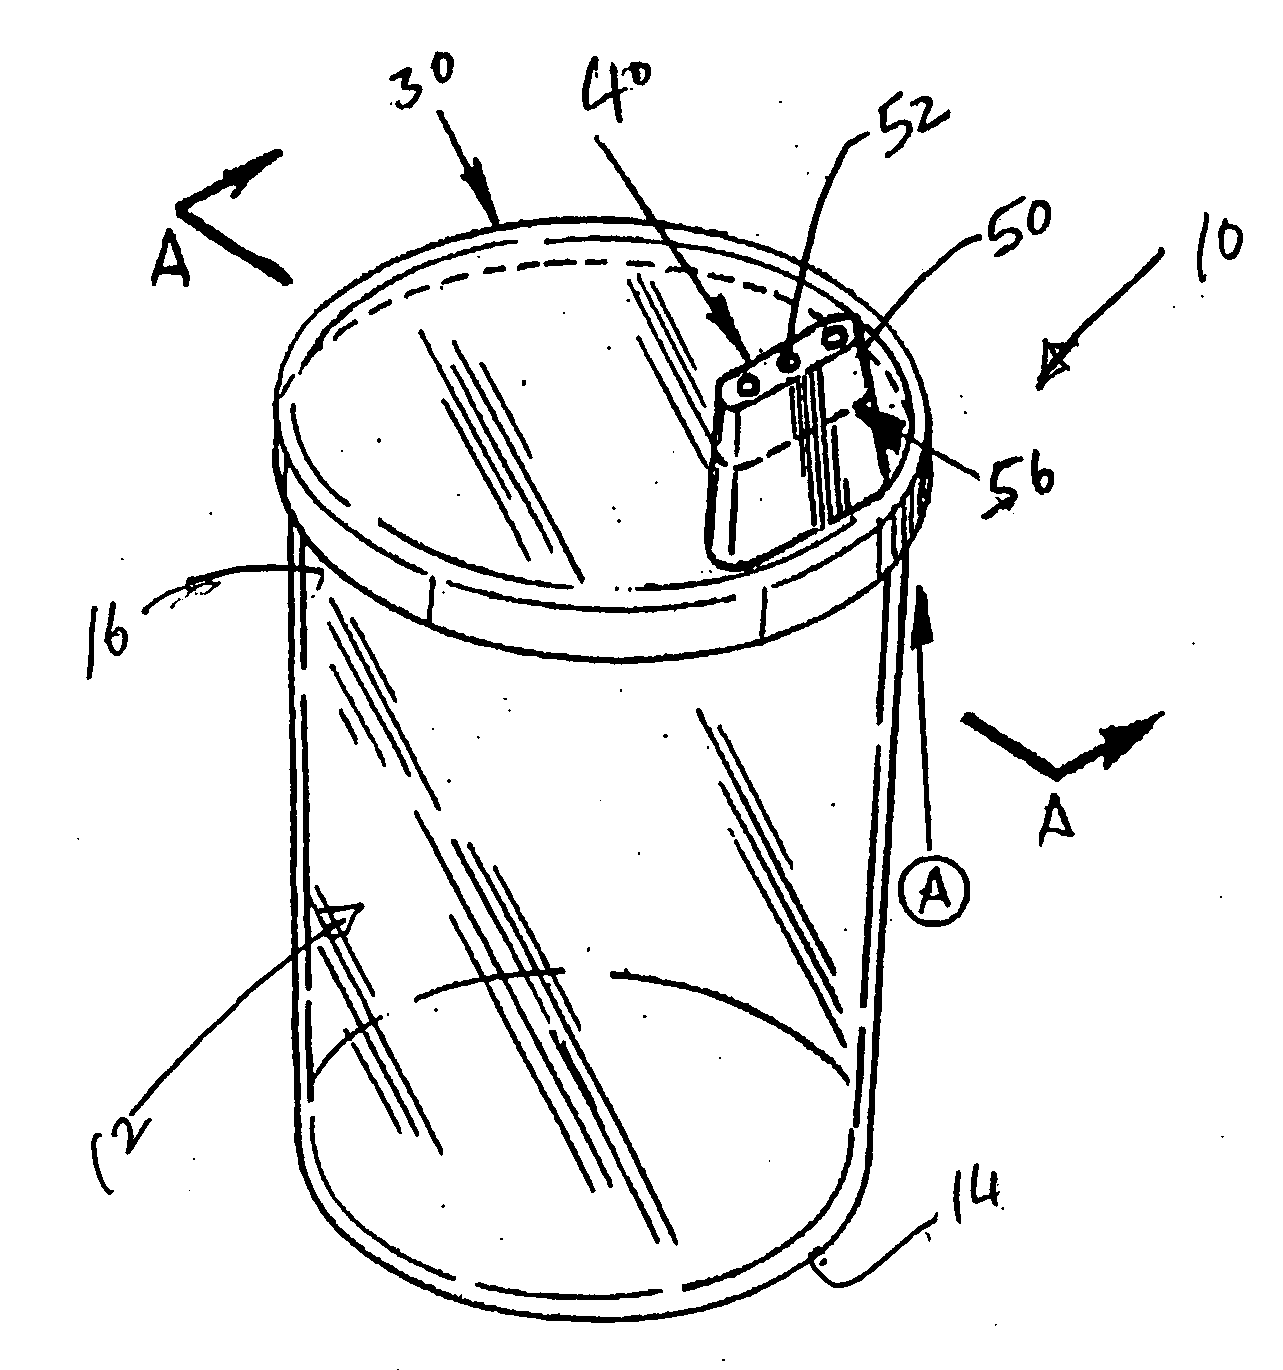 Pre-fillable and disposable sippy cup